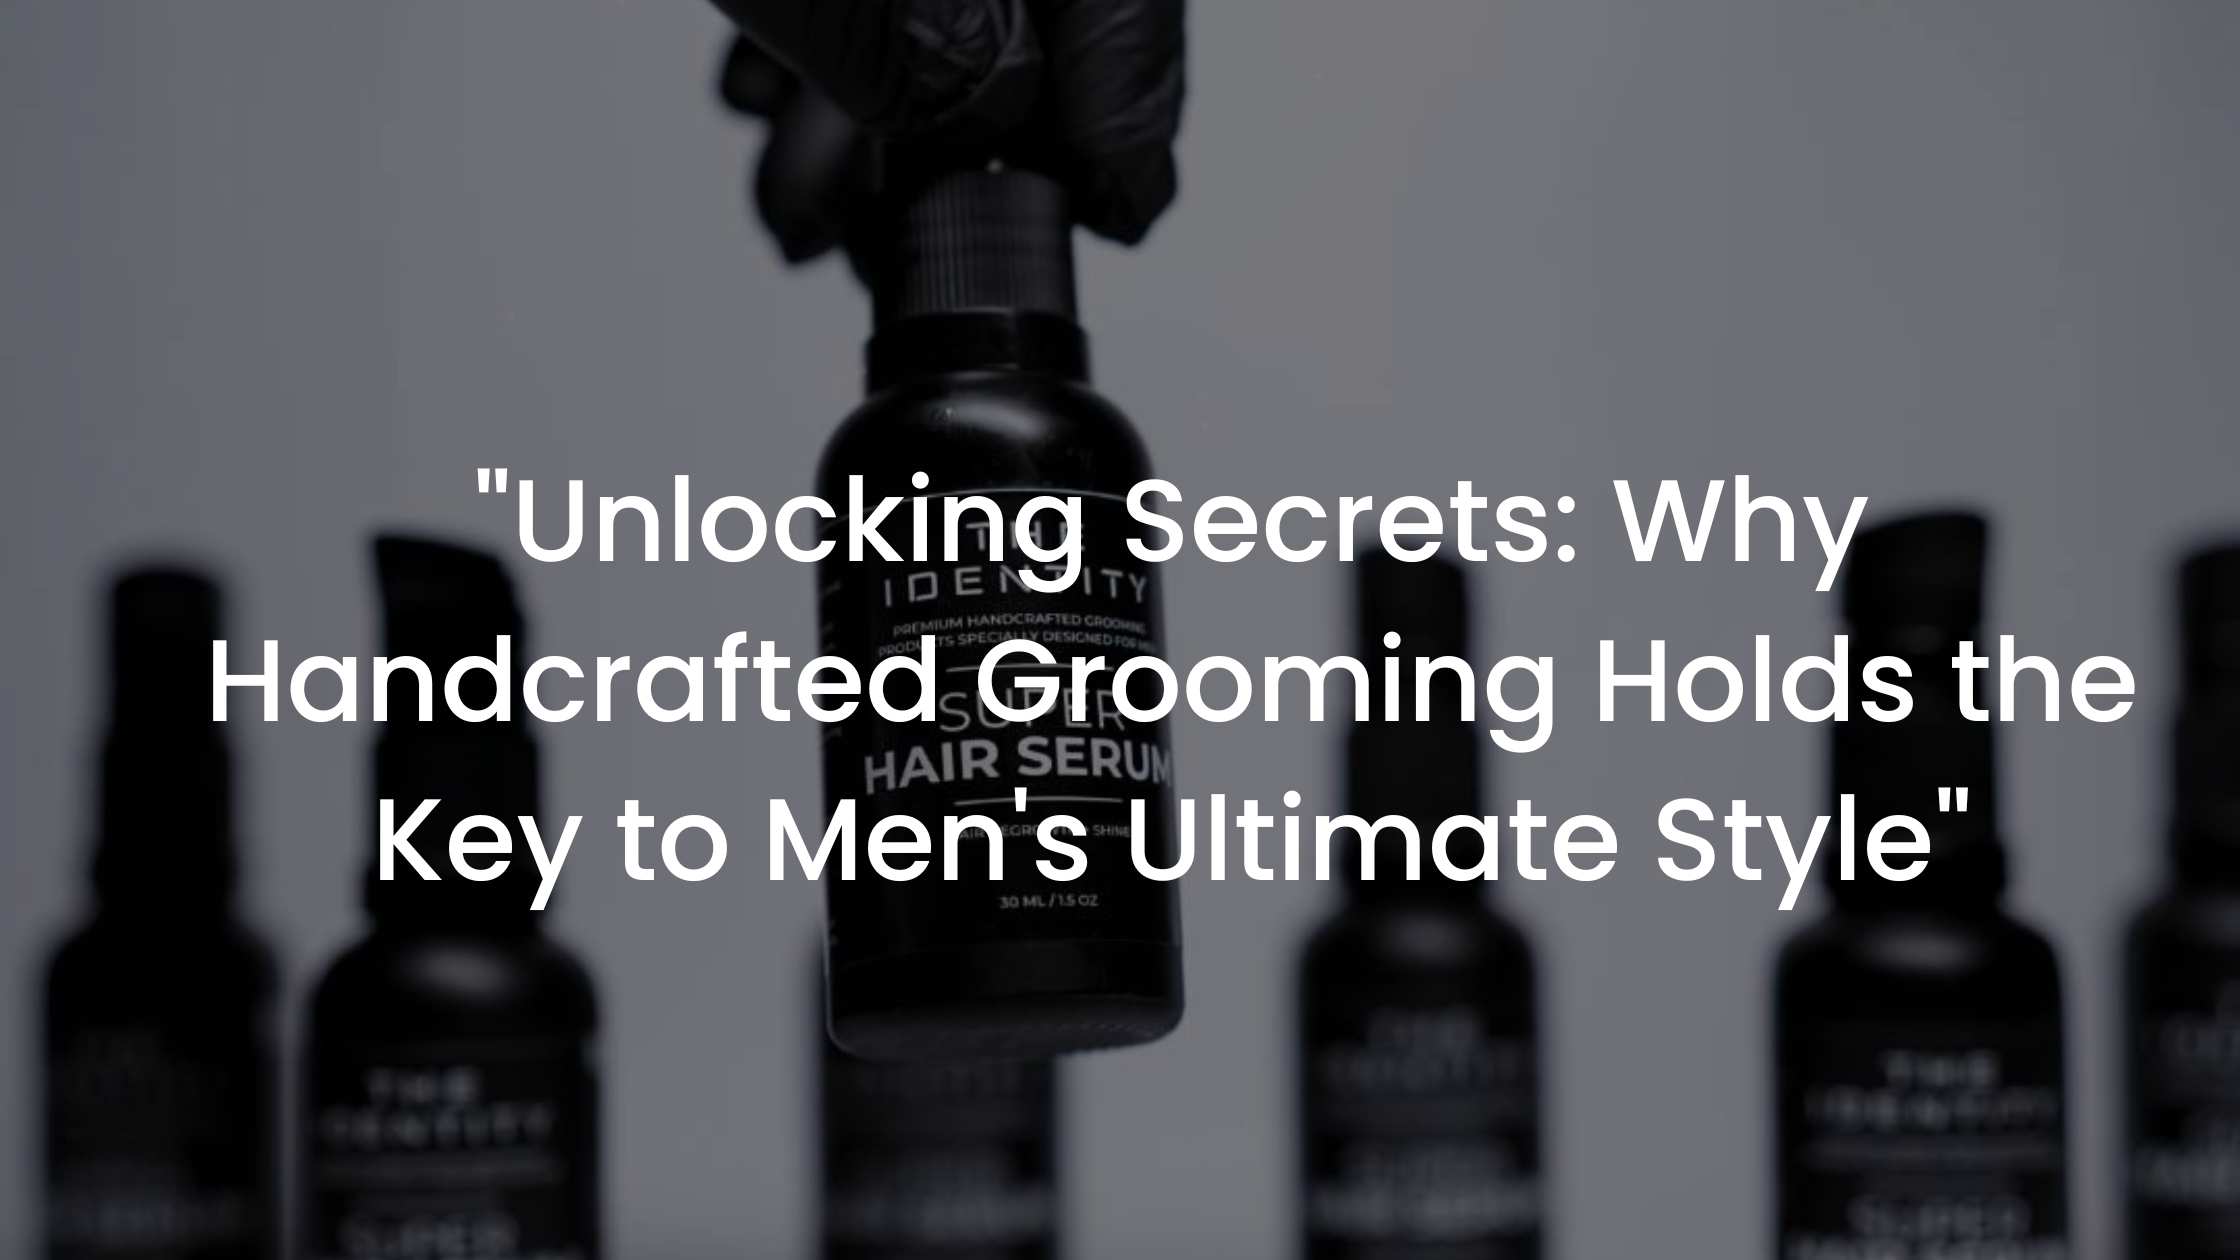 You are currently viewing “Unlocking Secrets: Why Handcrafted Grooming Holds the Key to Men’s Ultimate Style”